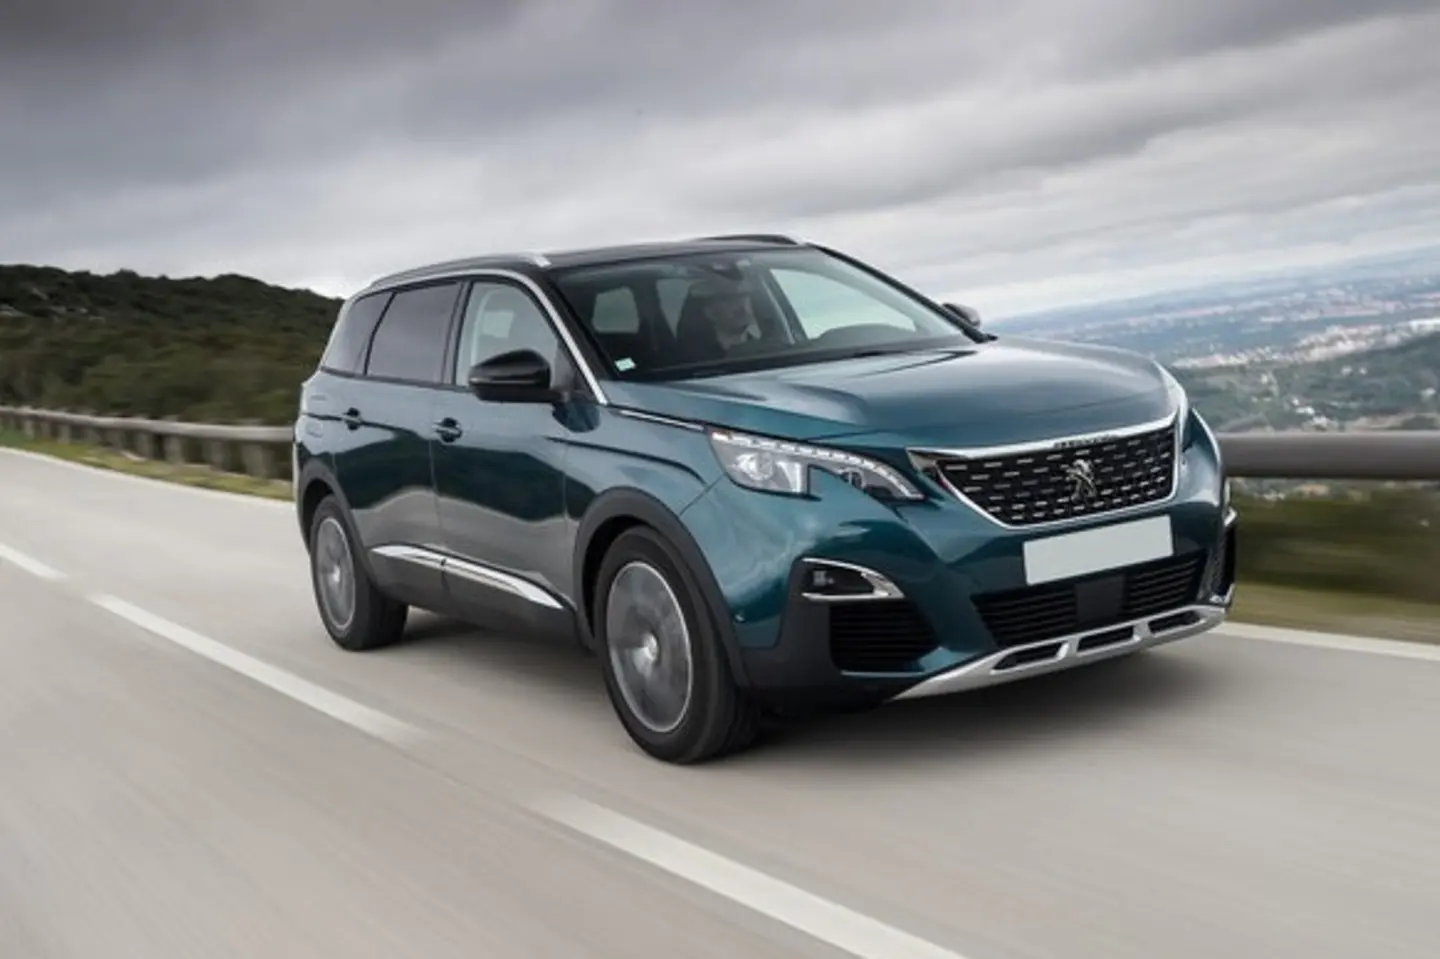 The front exterior of a green Peugeot 5008